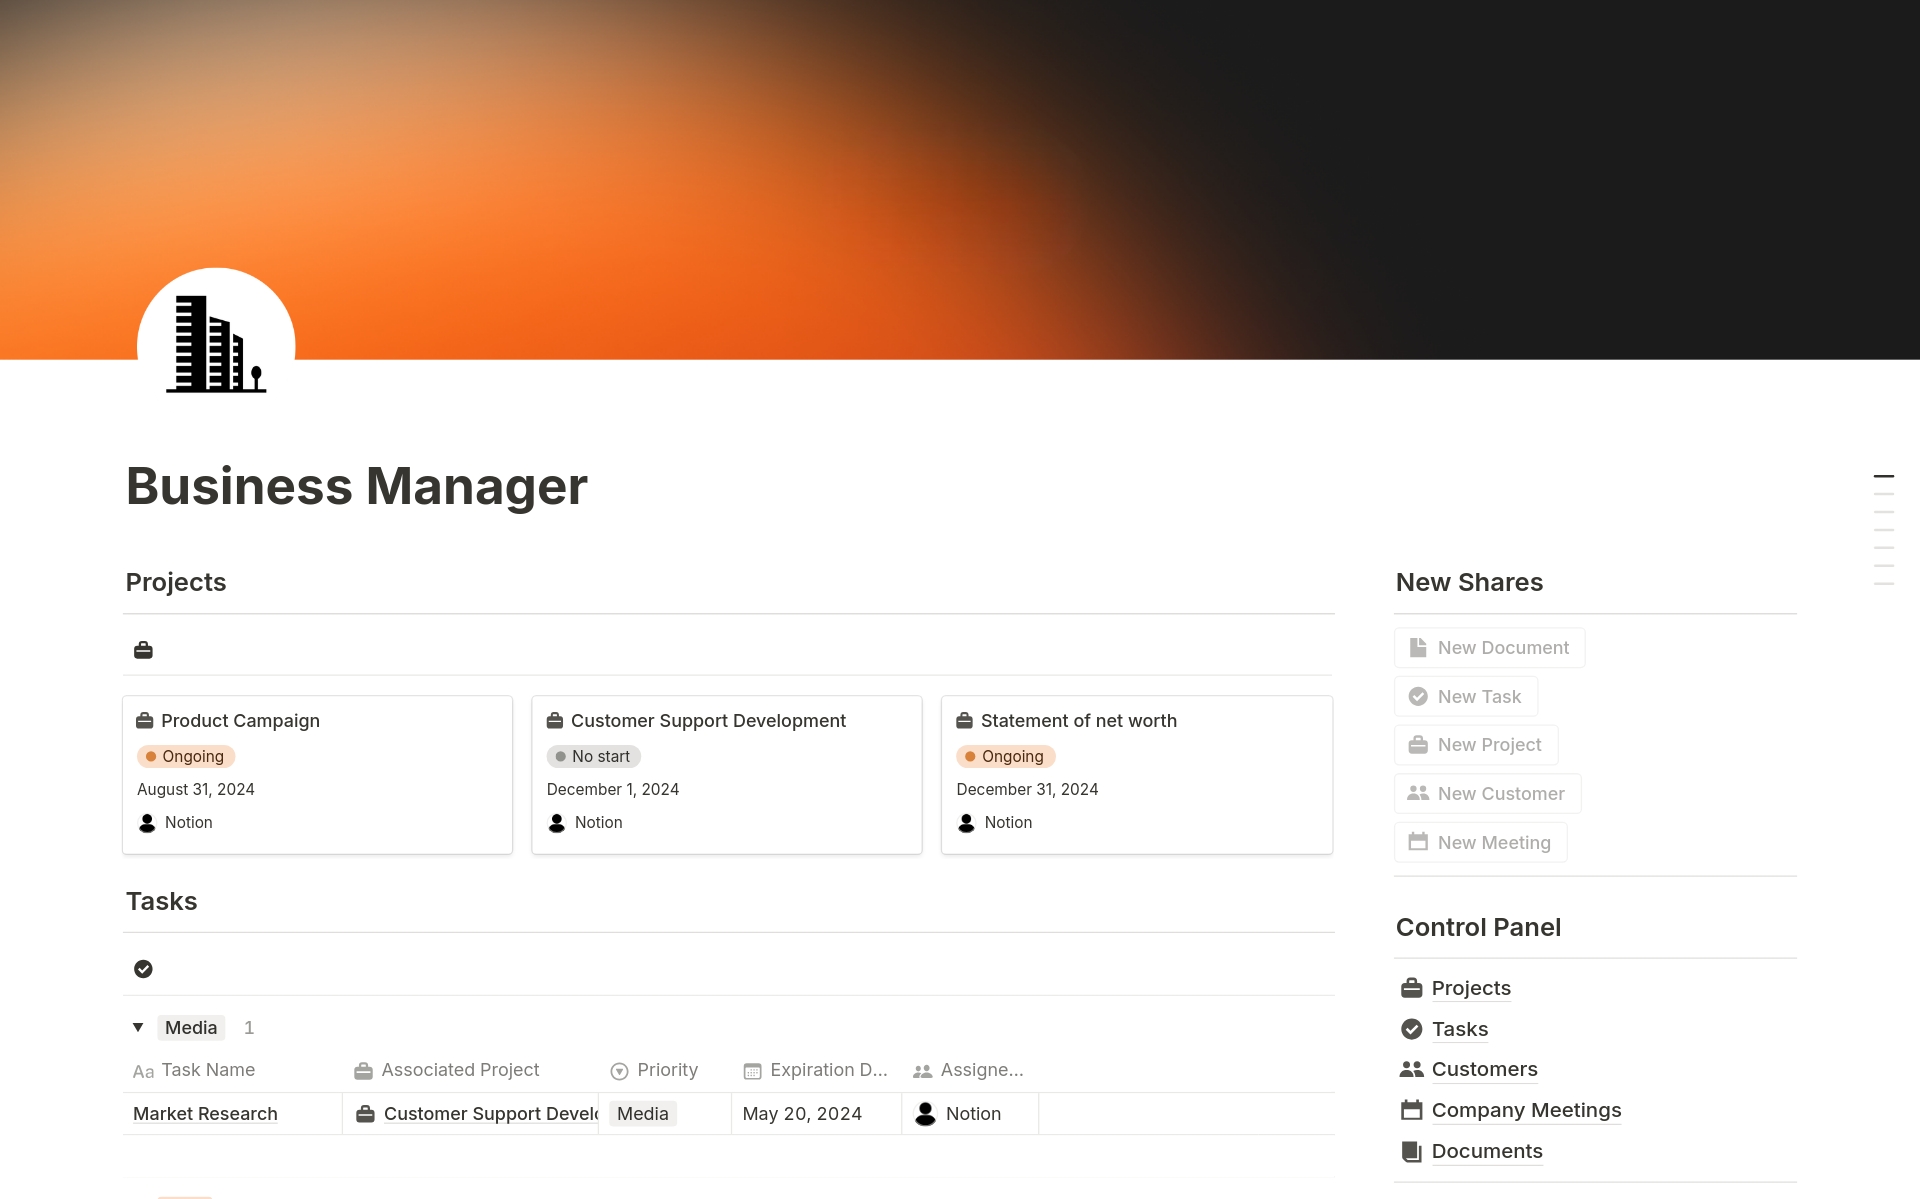 Manage all aspects of your company with the Business Manager template in Notion. Ideal for small and medium-sized businesses.